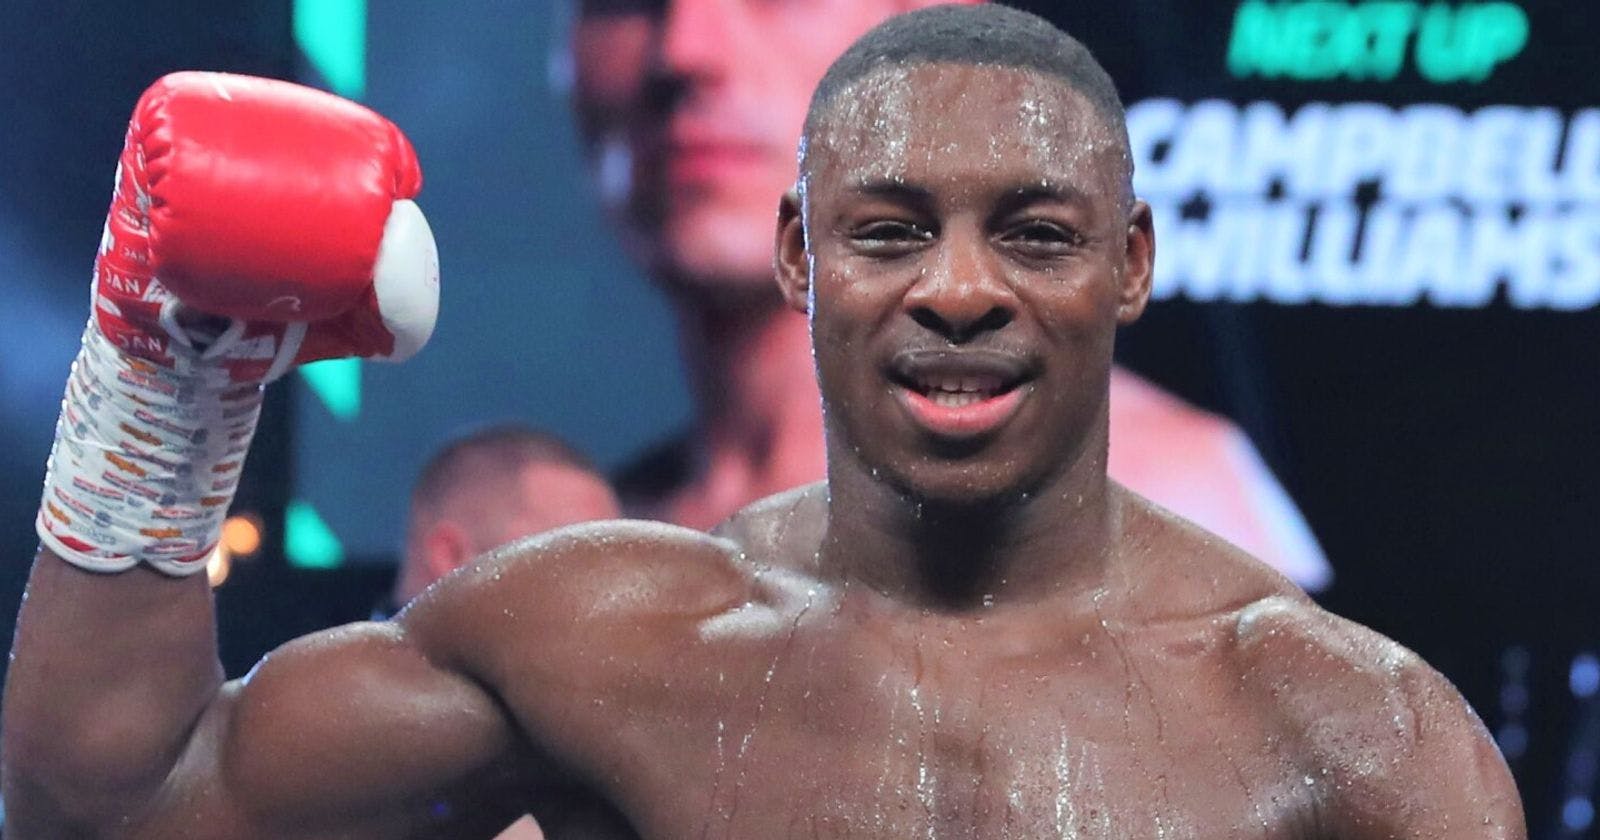 Dan Azeez is ready for 'world level' after impressing Artur Beterbiev in sparring, says Ben Shalom